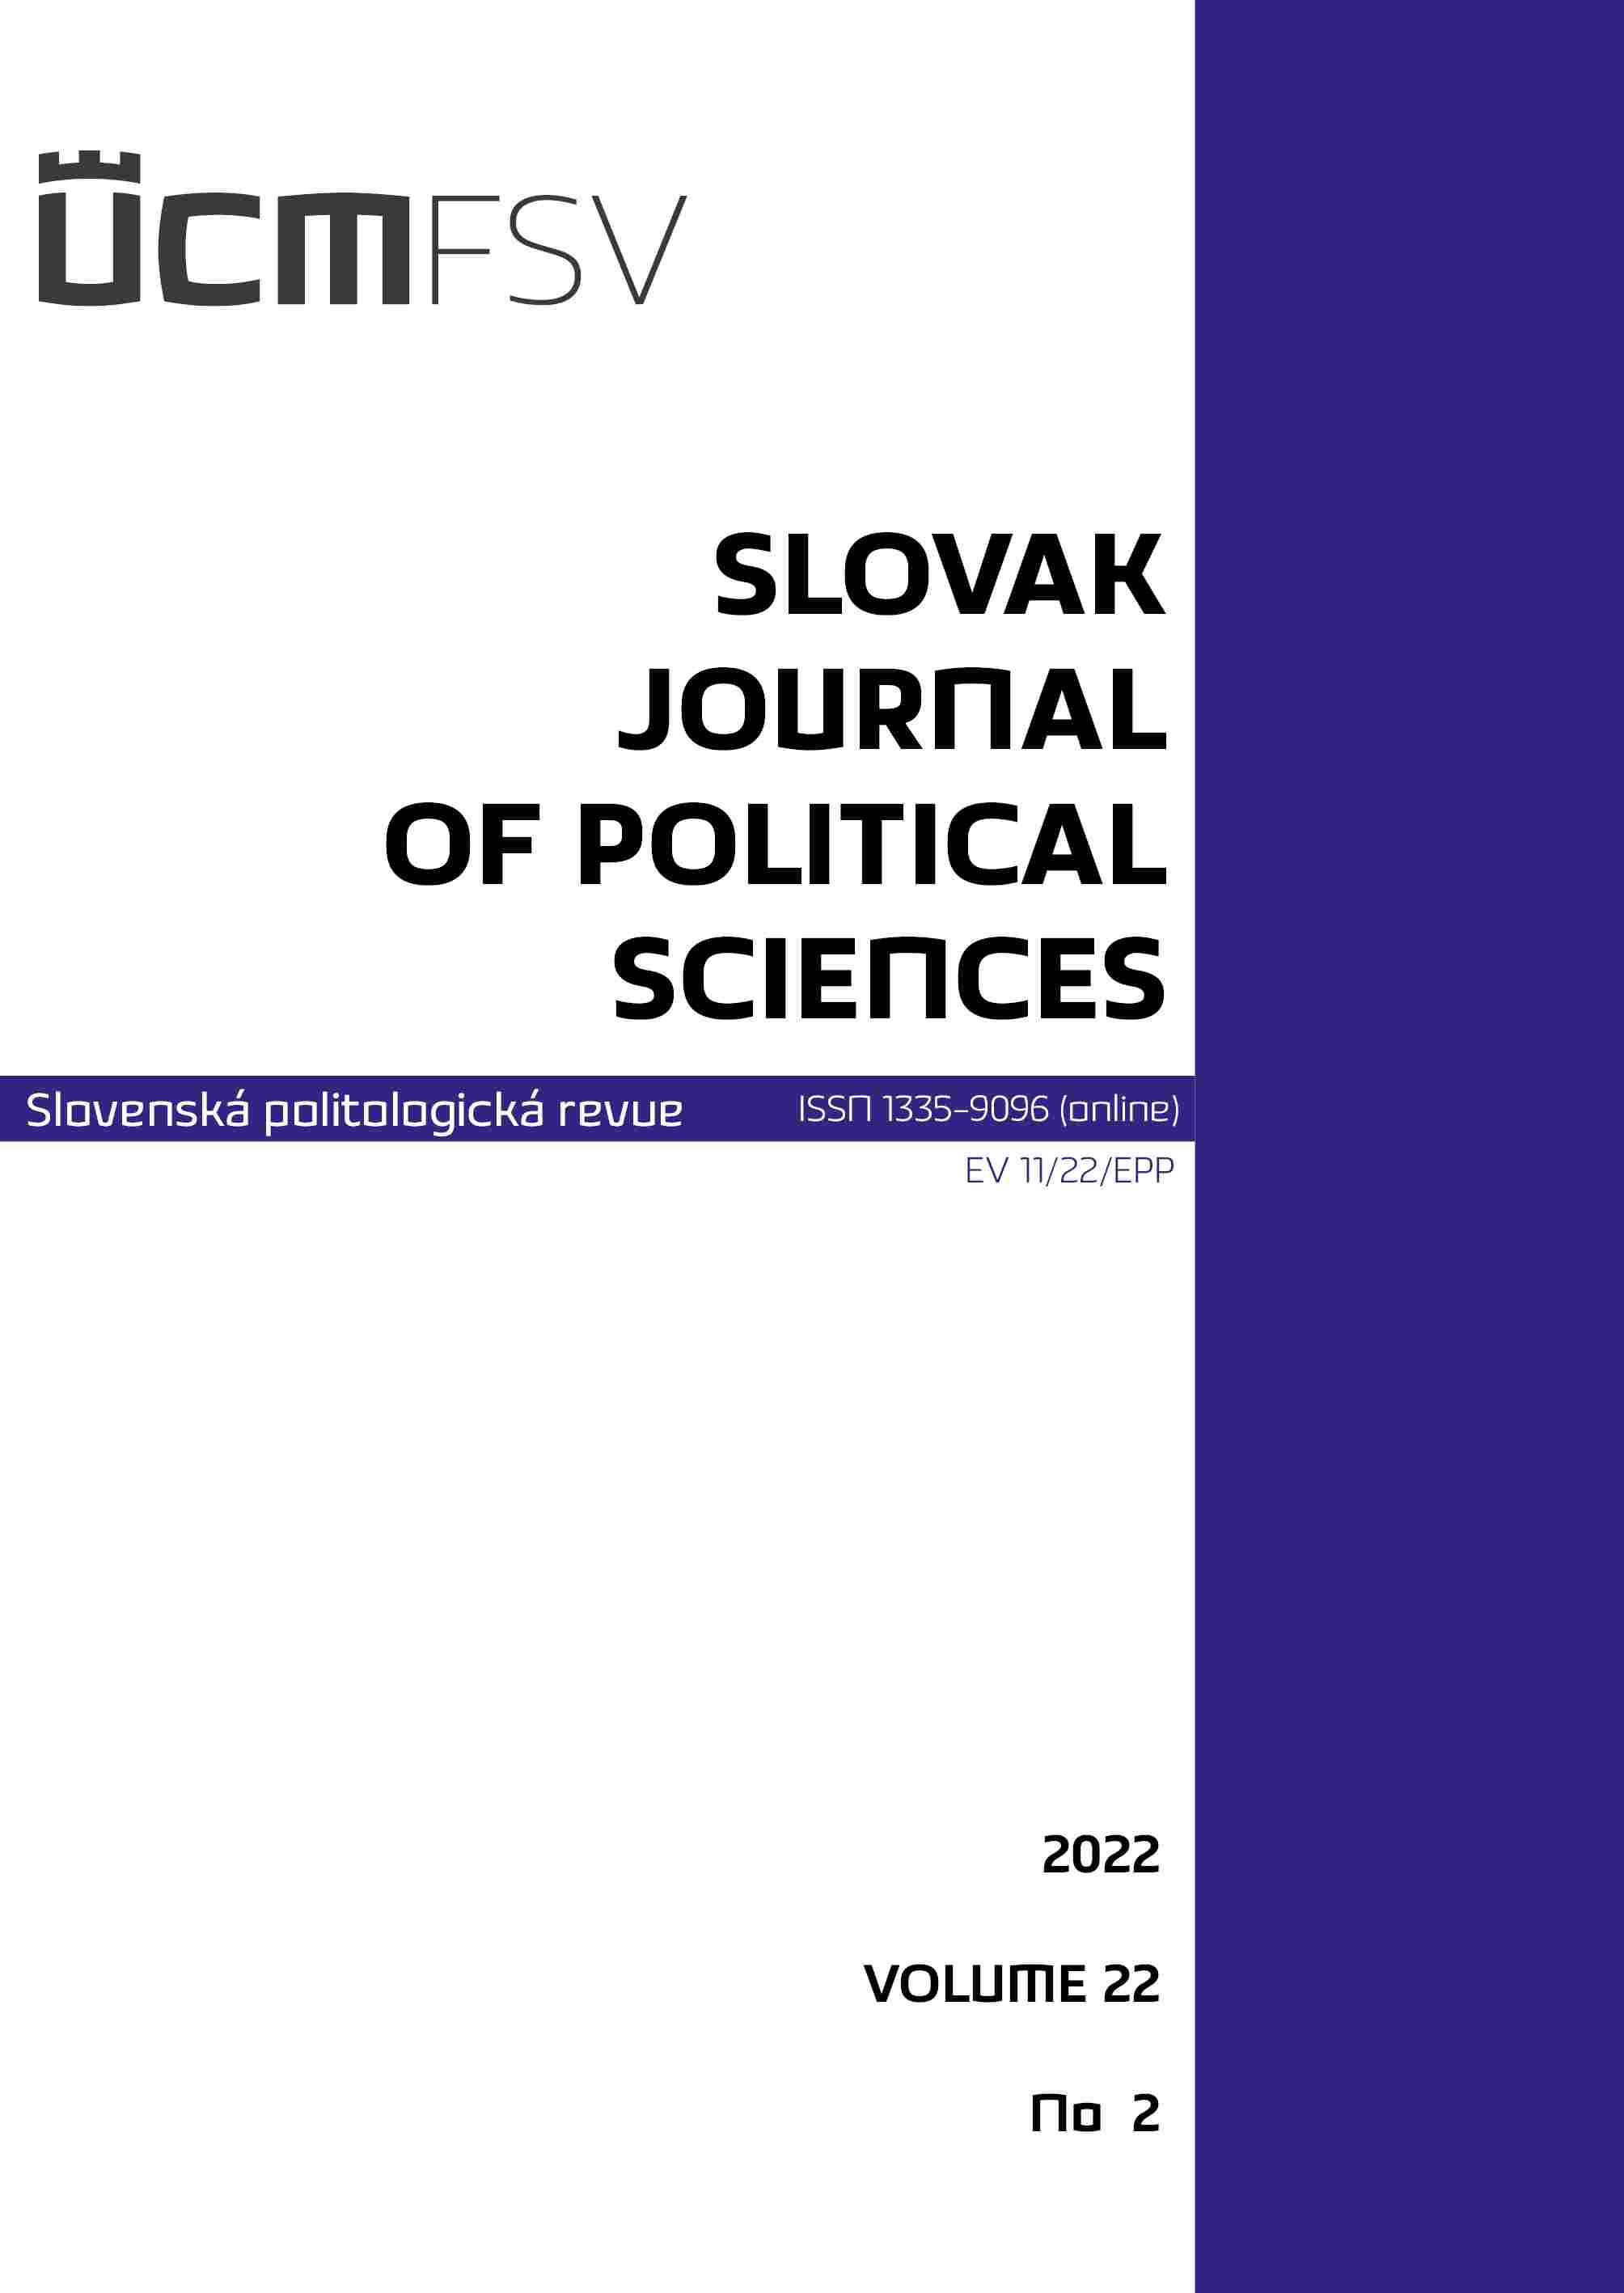 Changing Patterns in Electoral Behaviour: Electoral Volatility in Hungary and Slovakia